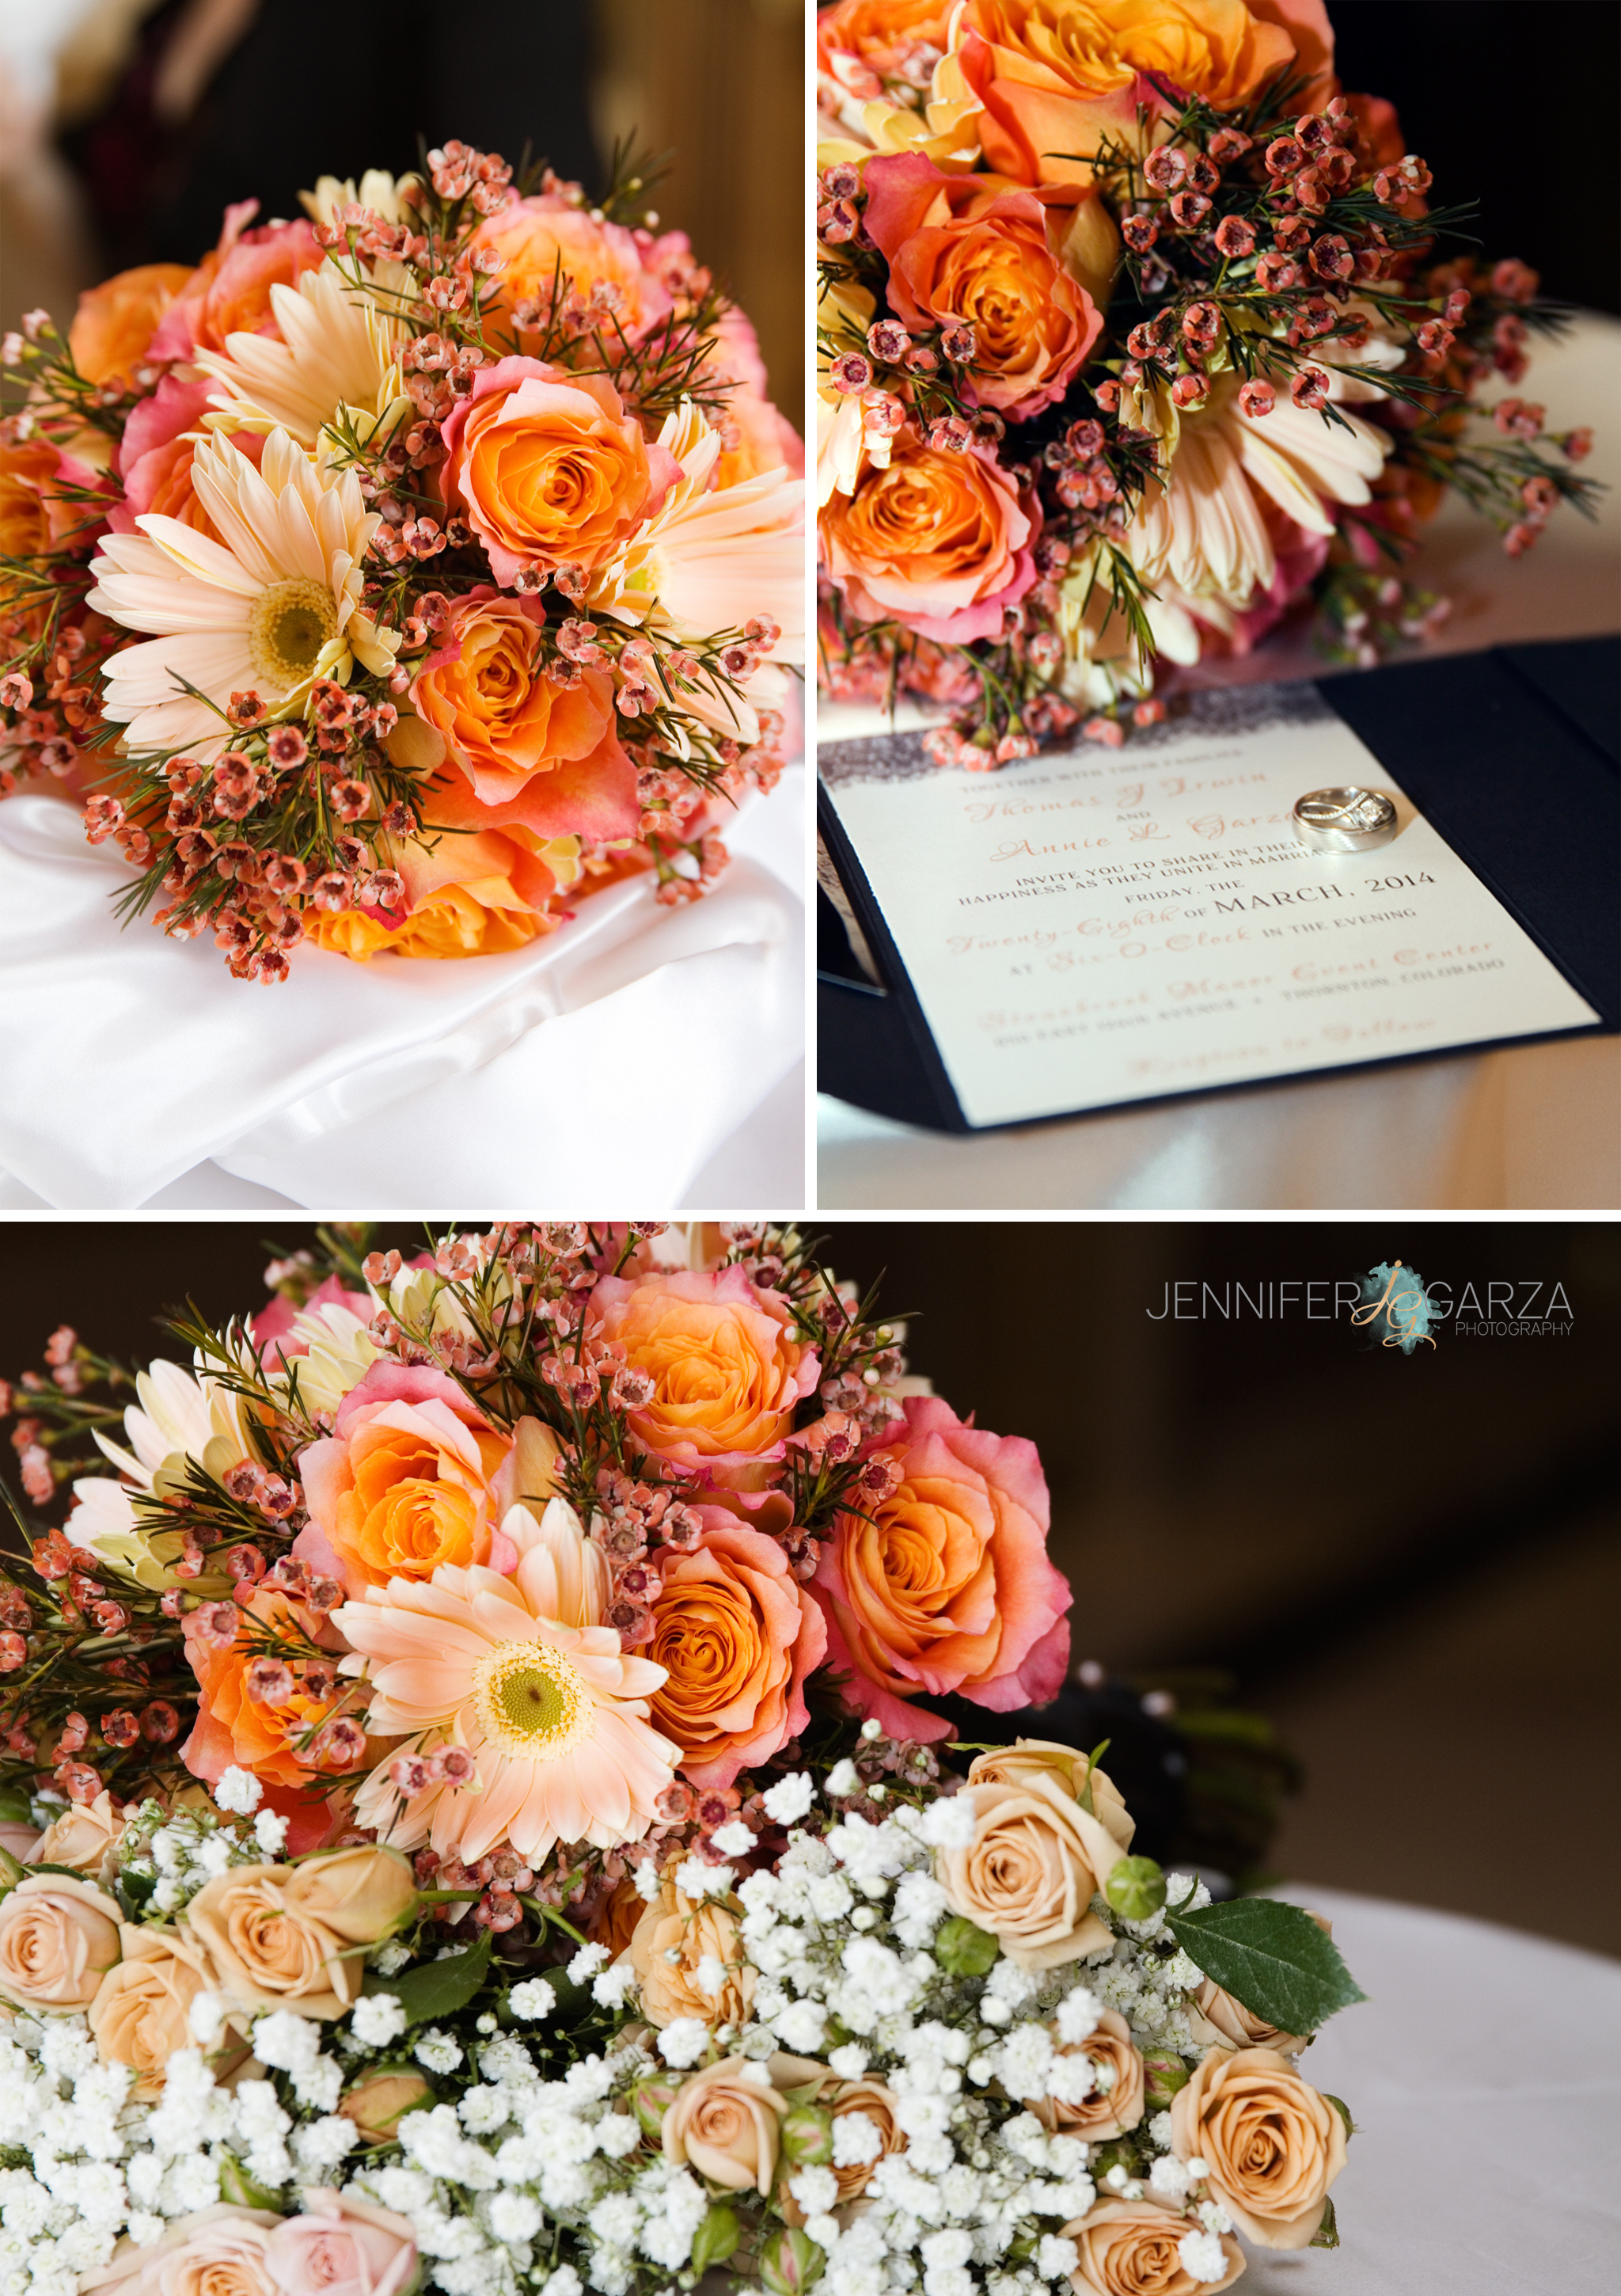 Close up details of the bridal bouquet and wedding invitations. Annie & Tom’s Stonebrook Manor Event Center Wedding by Colorado Wedding Photographer, Jennifer Garza. Colorado Wedding Photographer, Denver Wedding Photographer, Colorado Wedding Photos, Denver Wedding Photos, Colorado Bride, Denver Bride, Stonebrook Manor Wedding, Stonebrook Manor, Rocky Mountain Bride, Couture Colorado